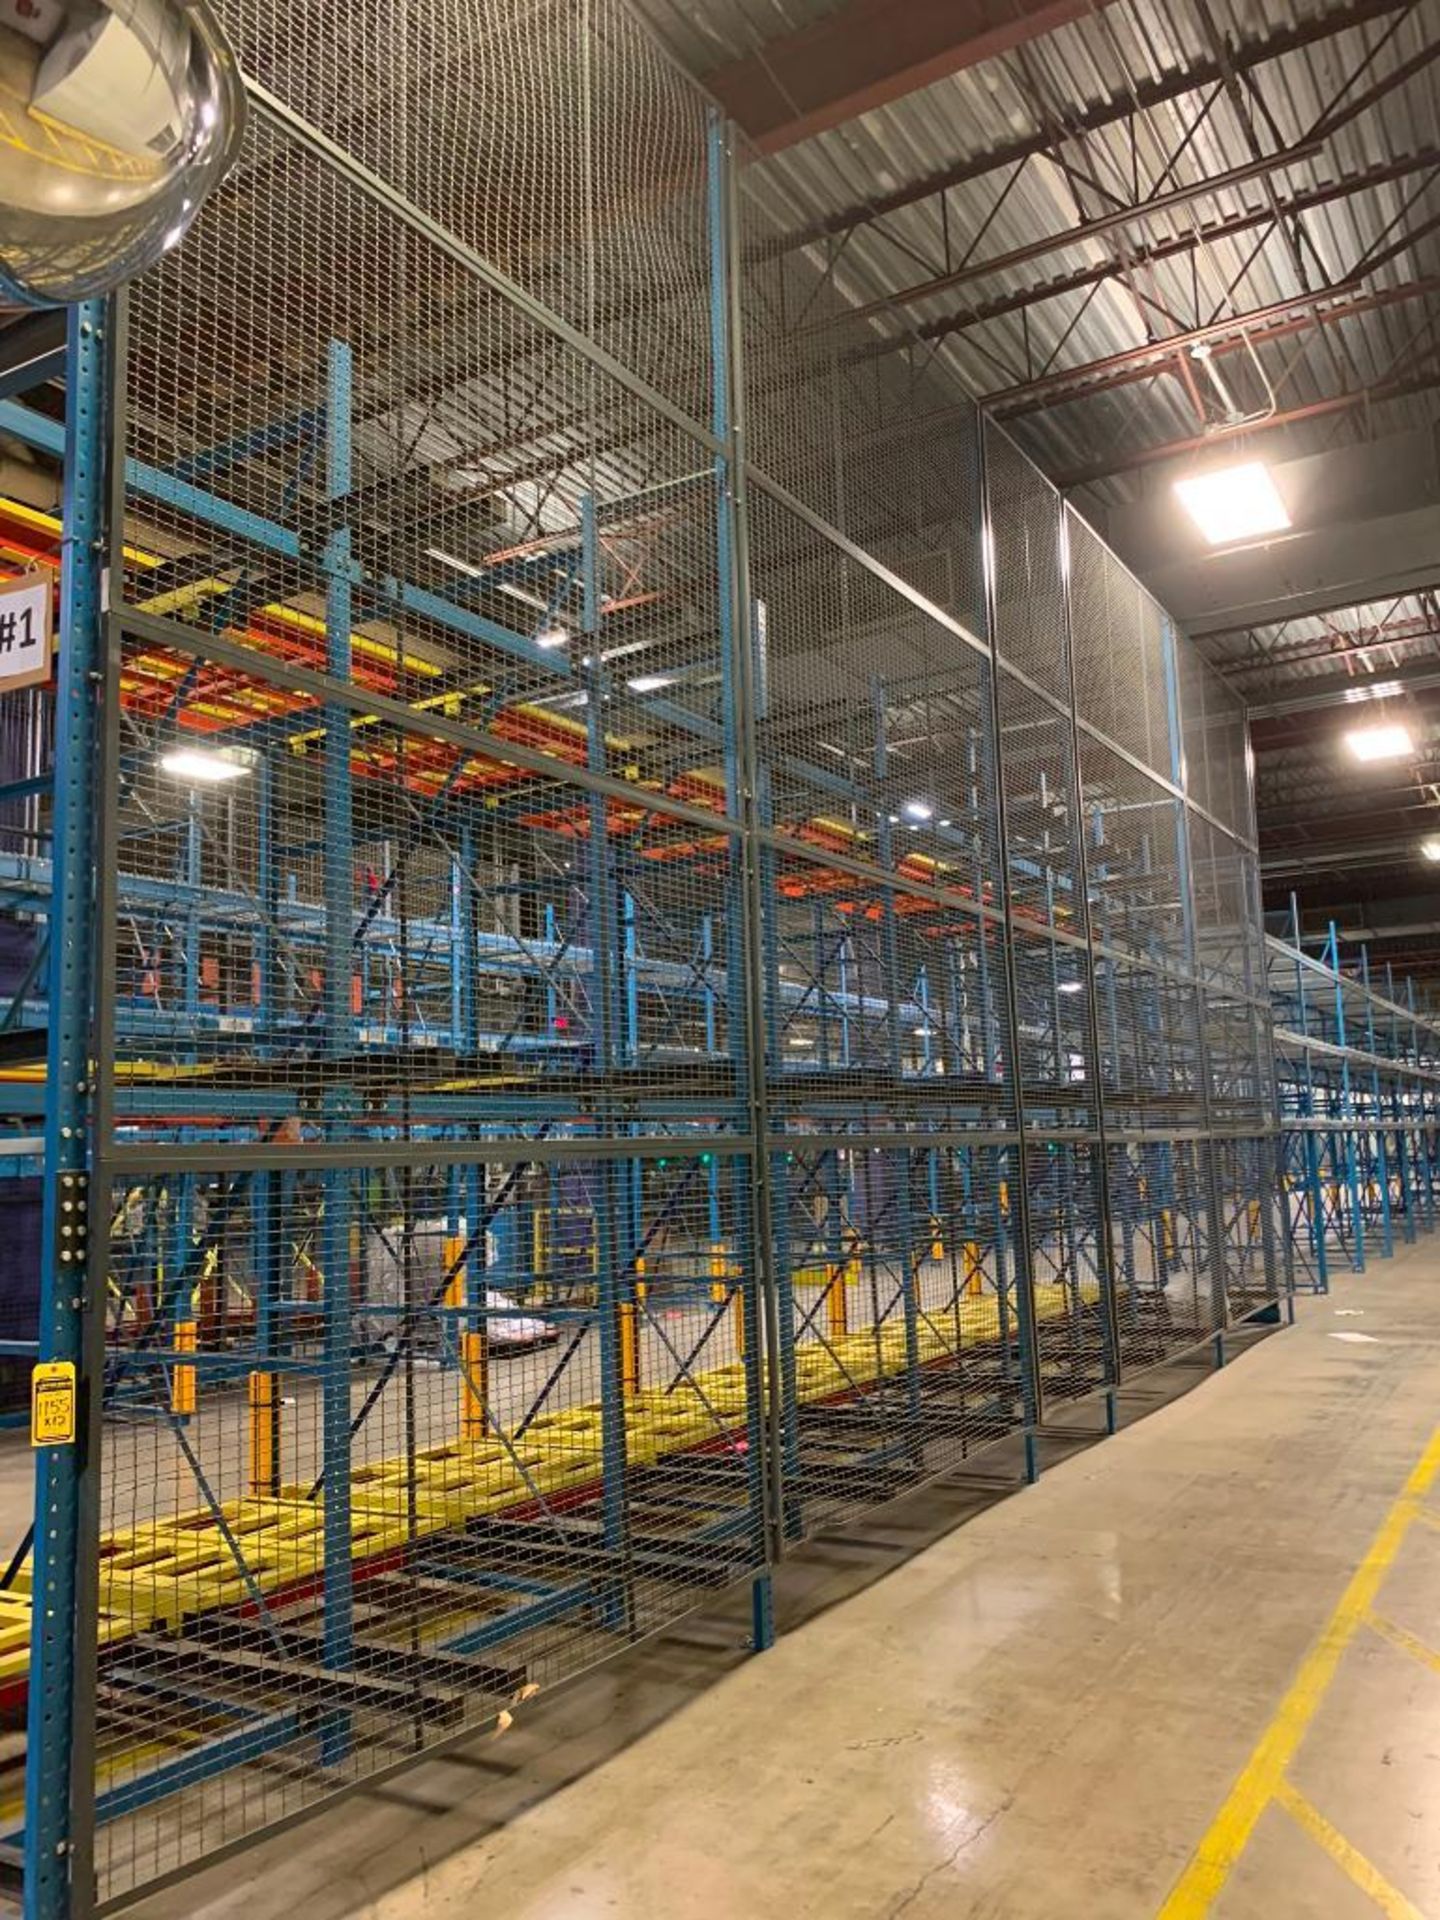 (12x) Bays of Bolt-Together Push-Back Pallet Rack; 15' T X 104" D, Each Bay Has (6) Pallet Positions - Image 10 of 12